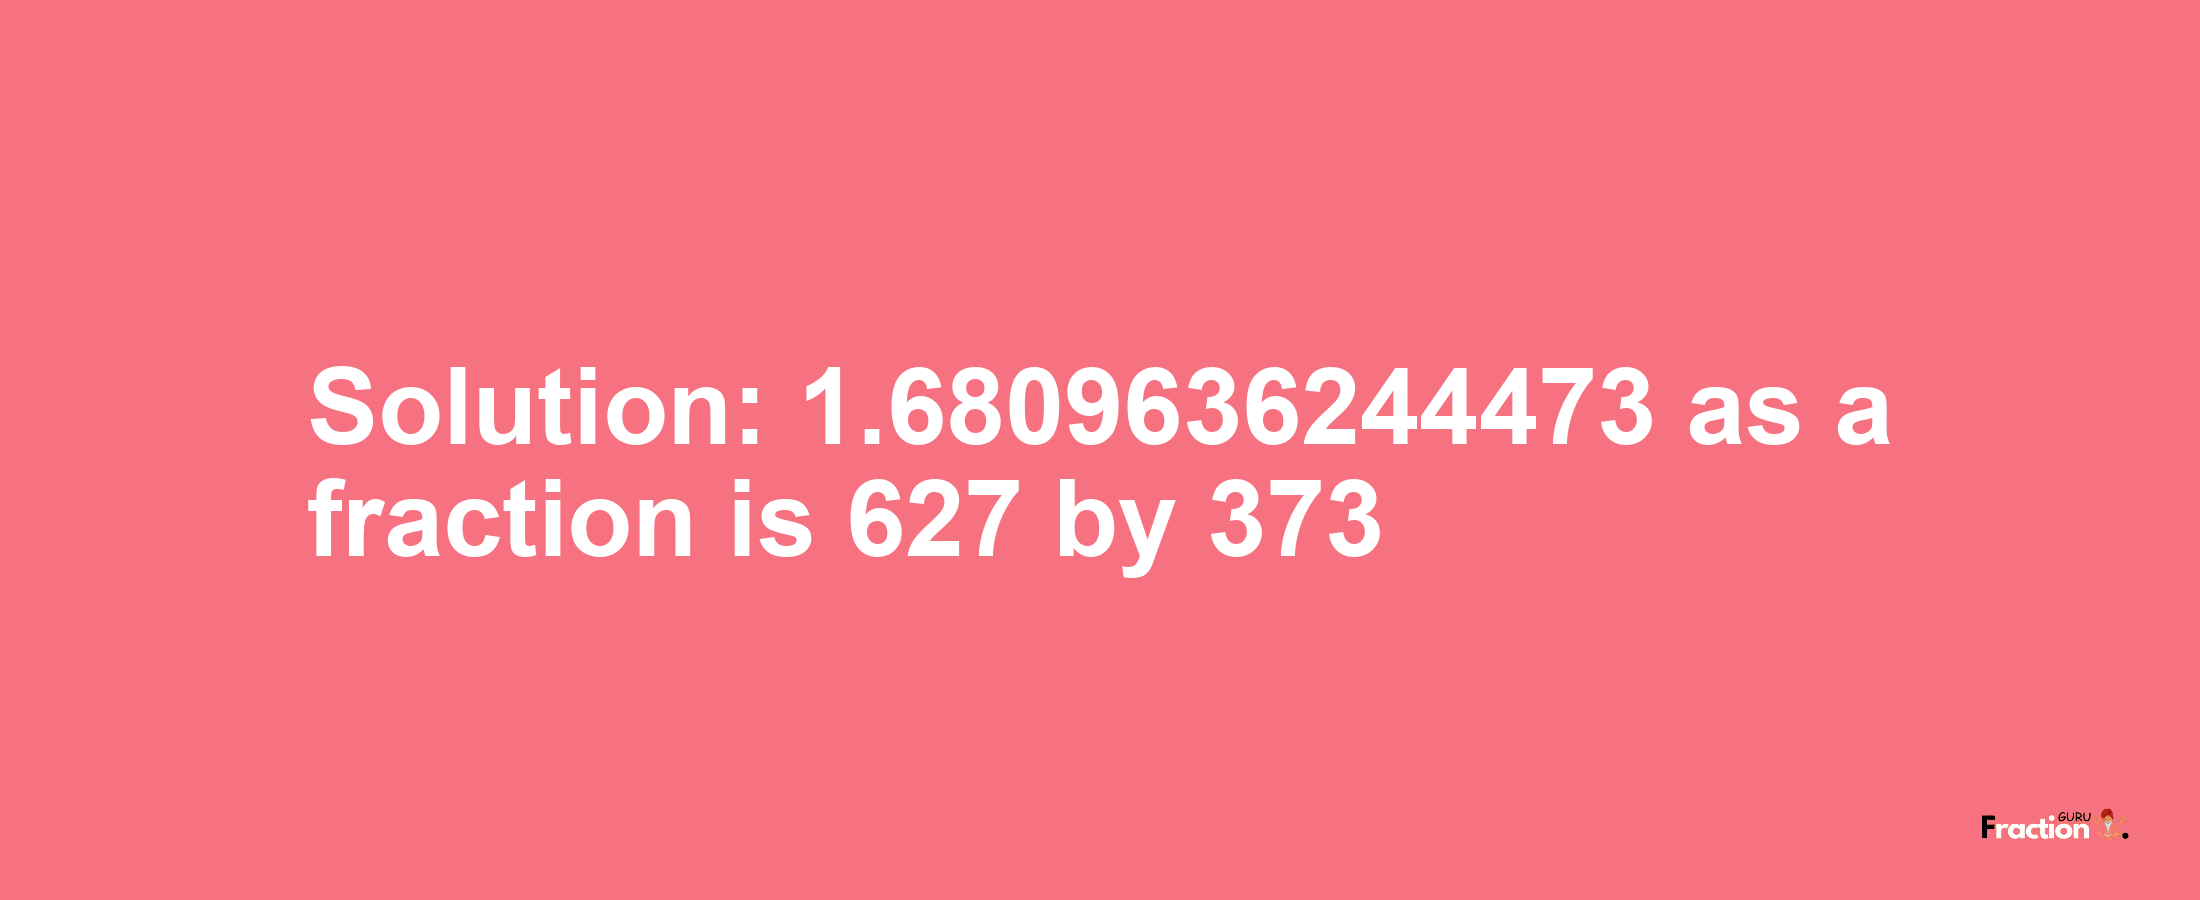 Solution:1.6809636244473 as a fraction is 627/373